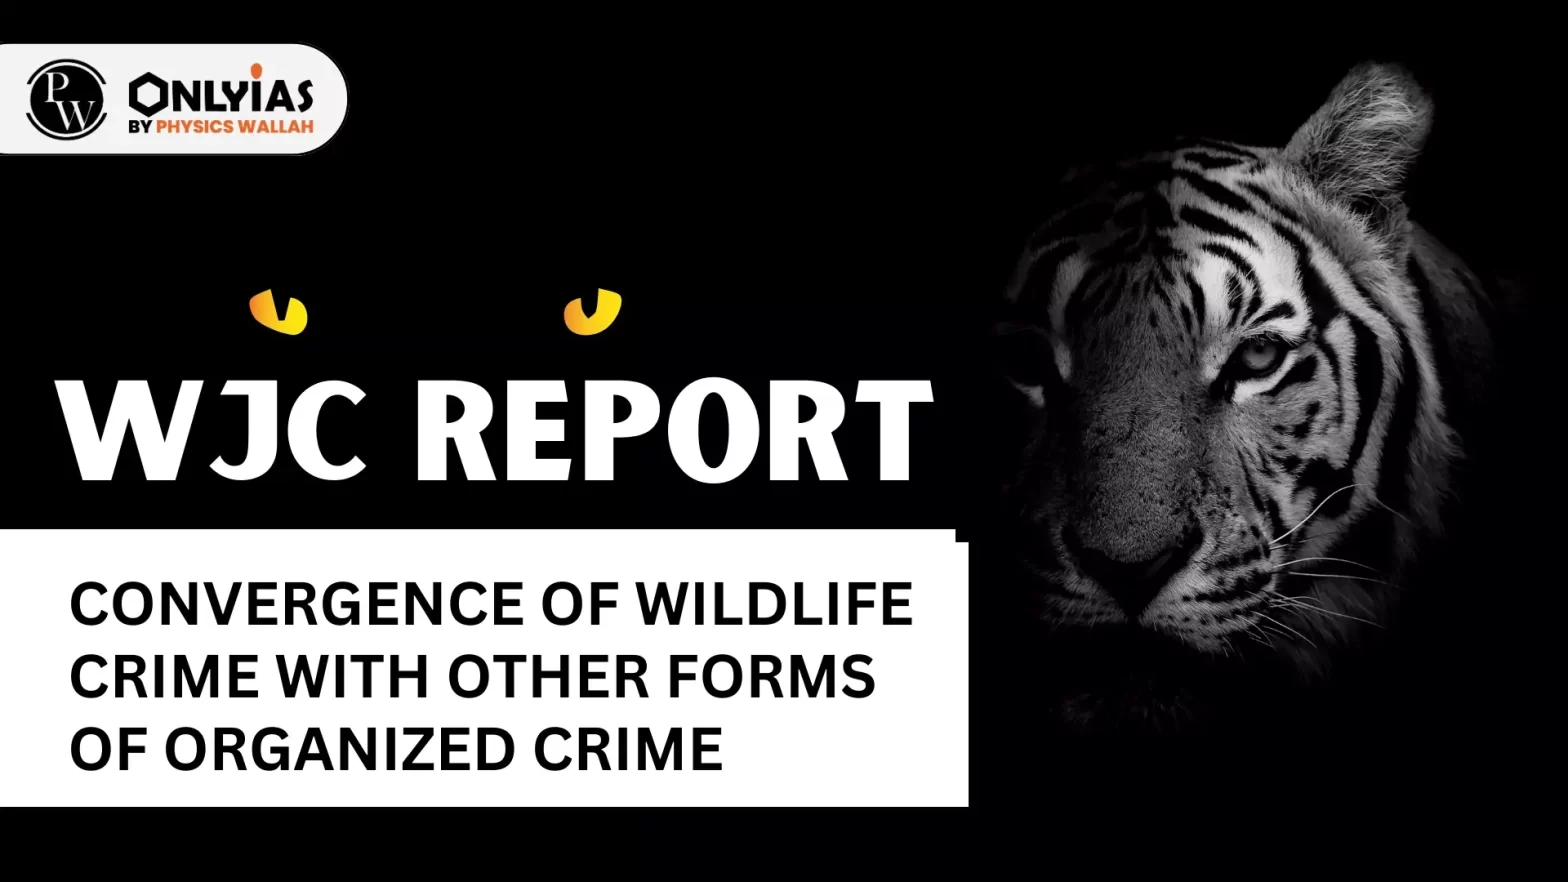 WJC Report – Convergence of Wildlife Crime With Other Forms of Organized Crime